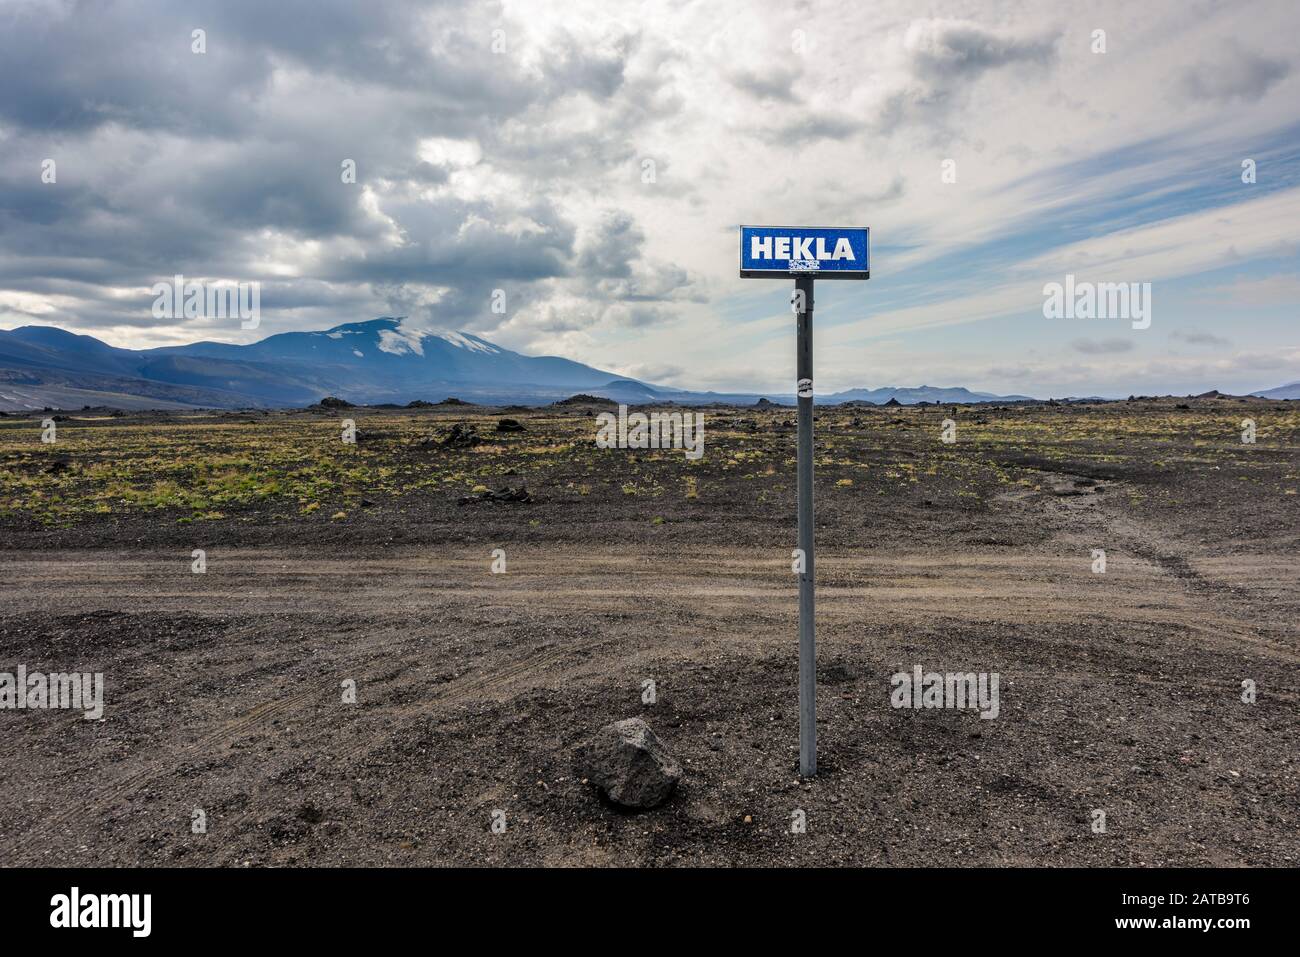 Signpost 'Hekla' with Hekla Volcano, called 'The Gateway to Hell', Iceland Stock Photo